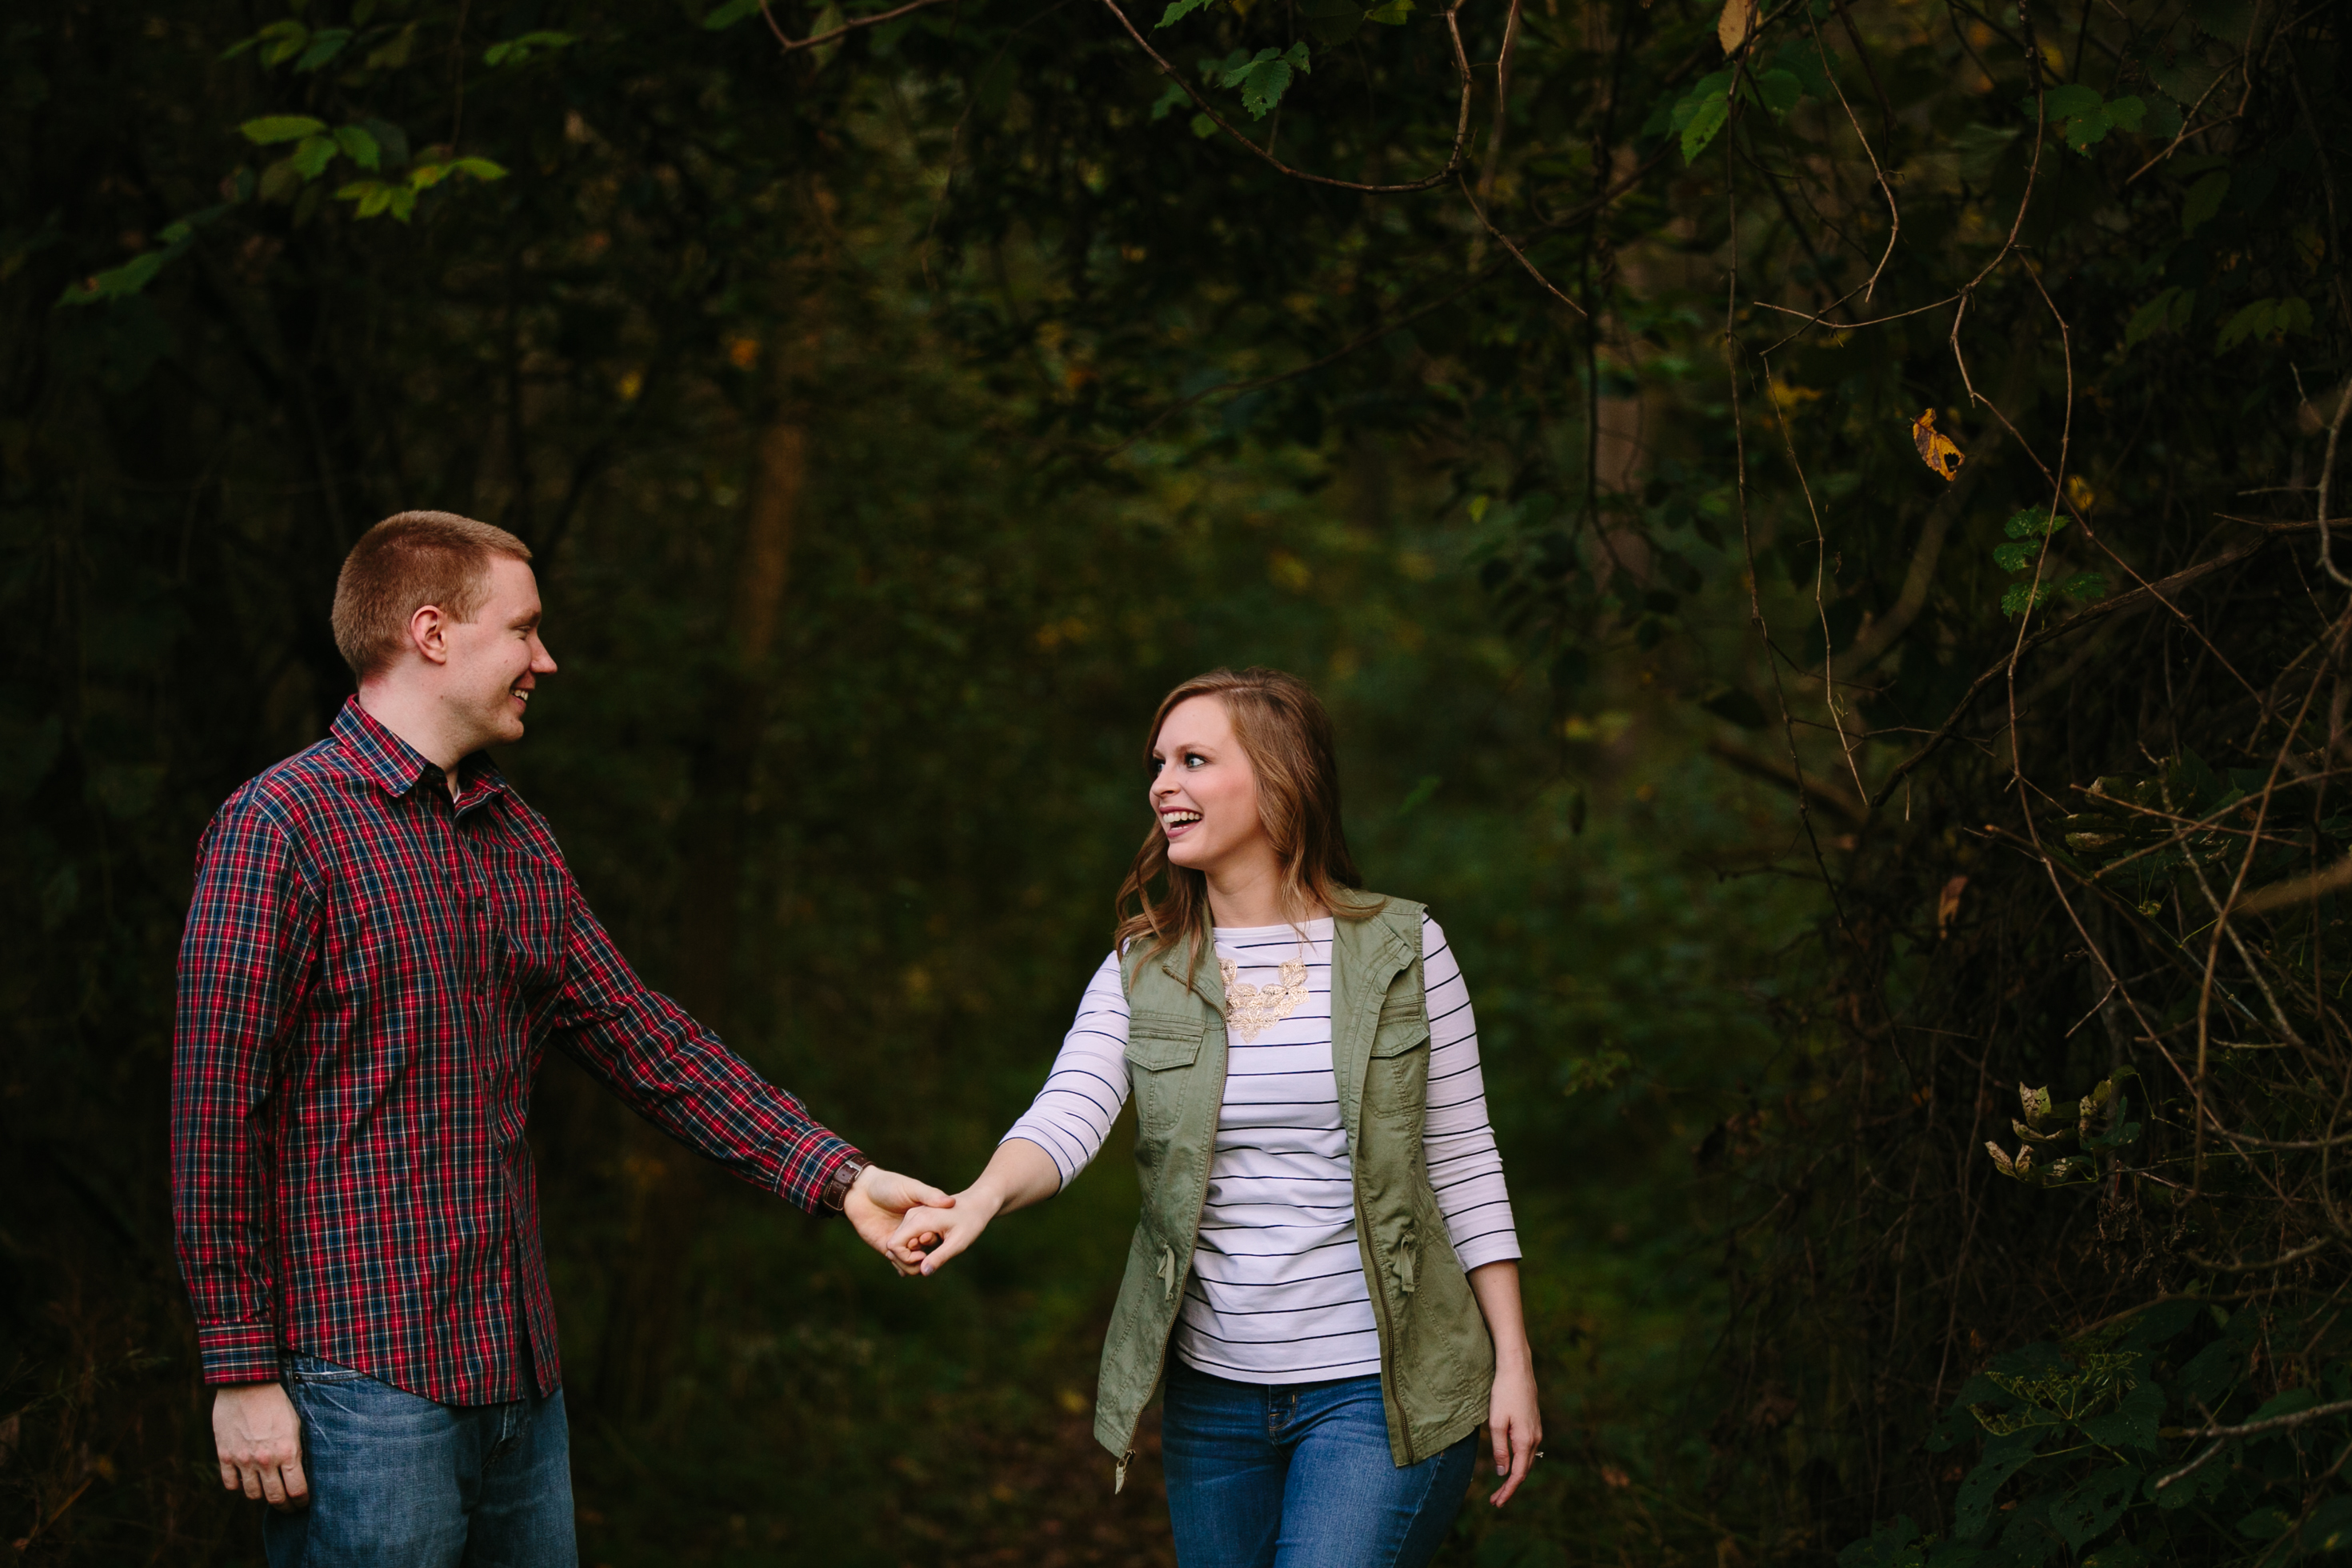 mines of spain dubuque outdoor engagement photos by catherine furlin photography